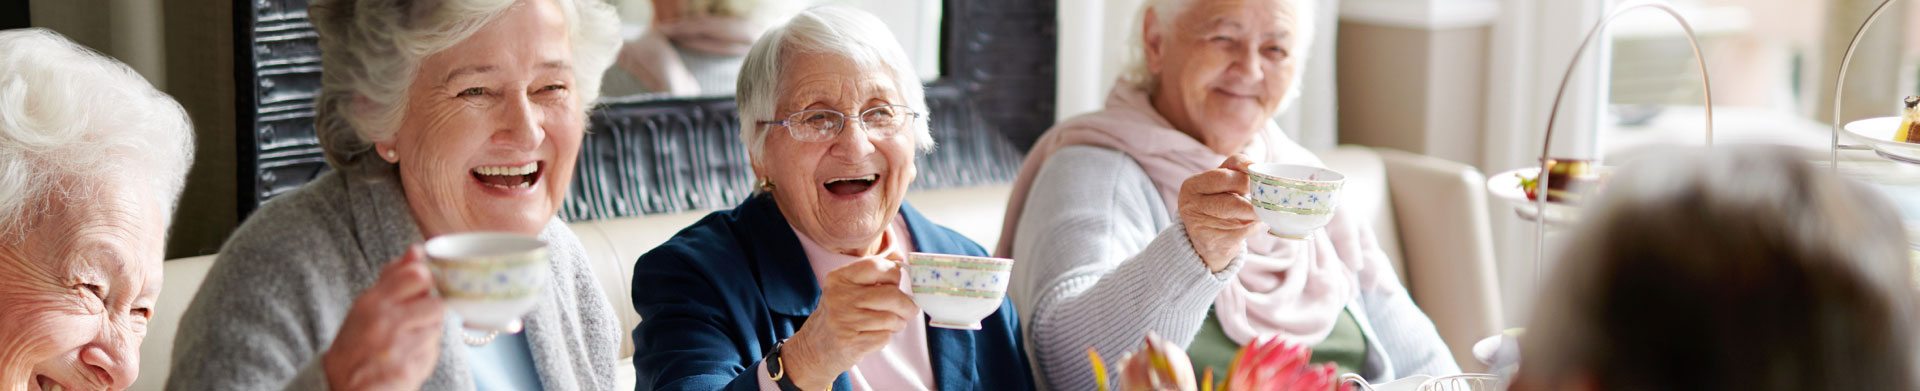 Elderly women hold up fine china tea cups and smile for the camera